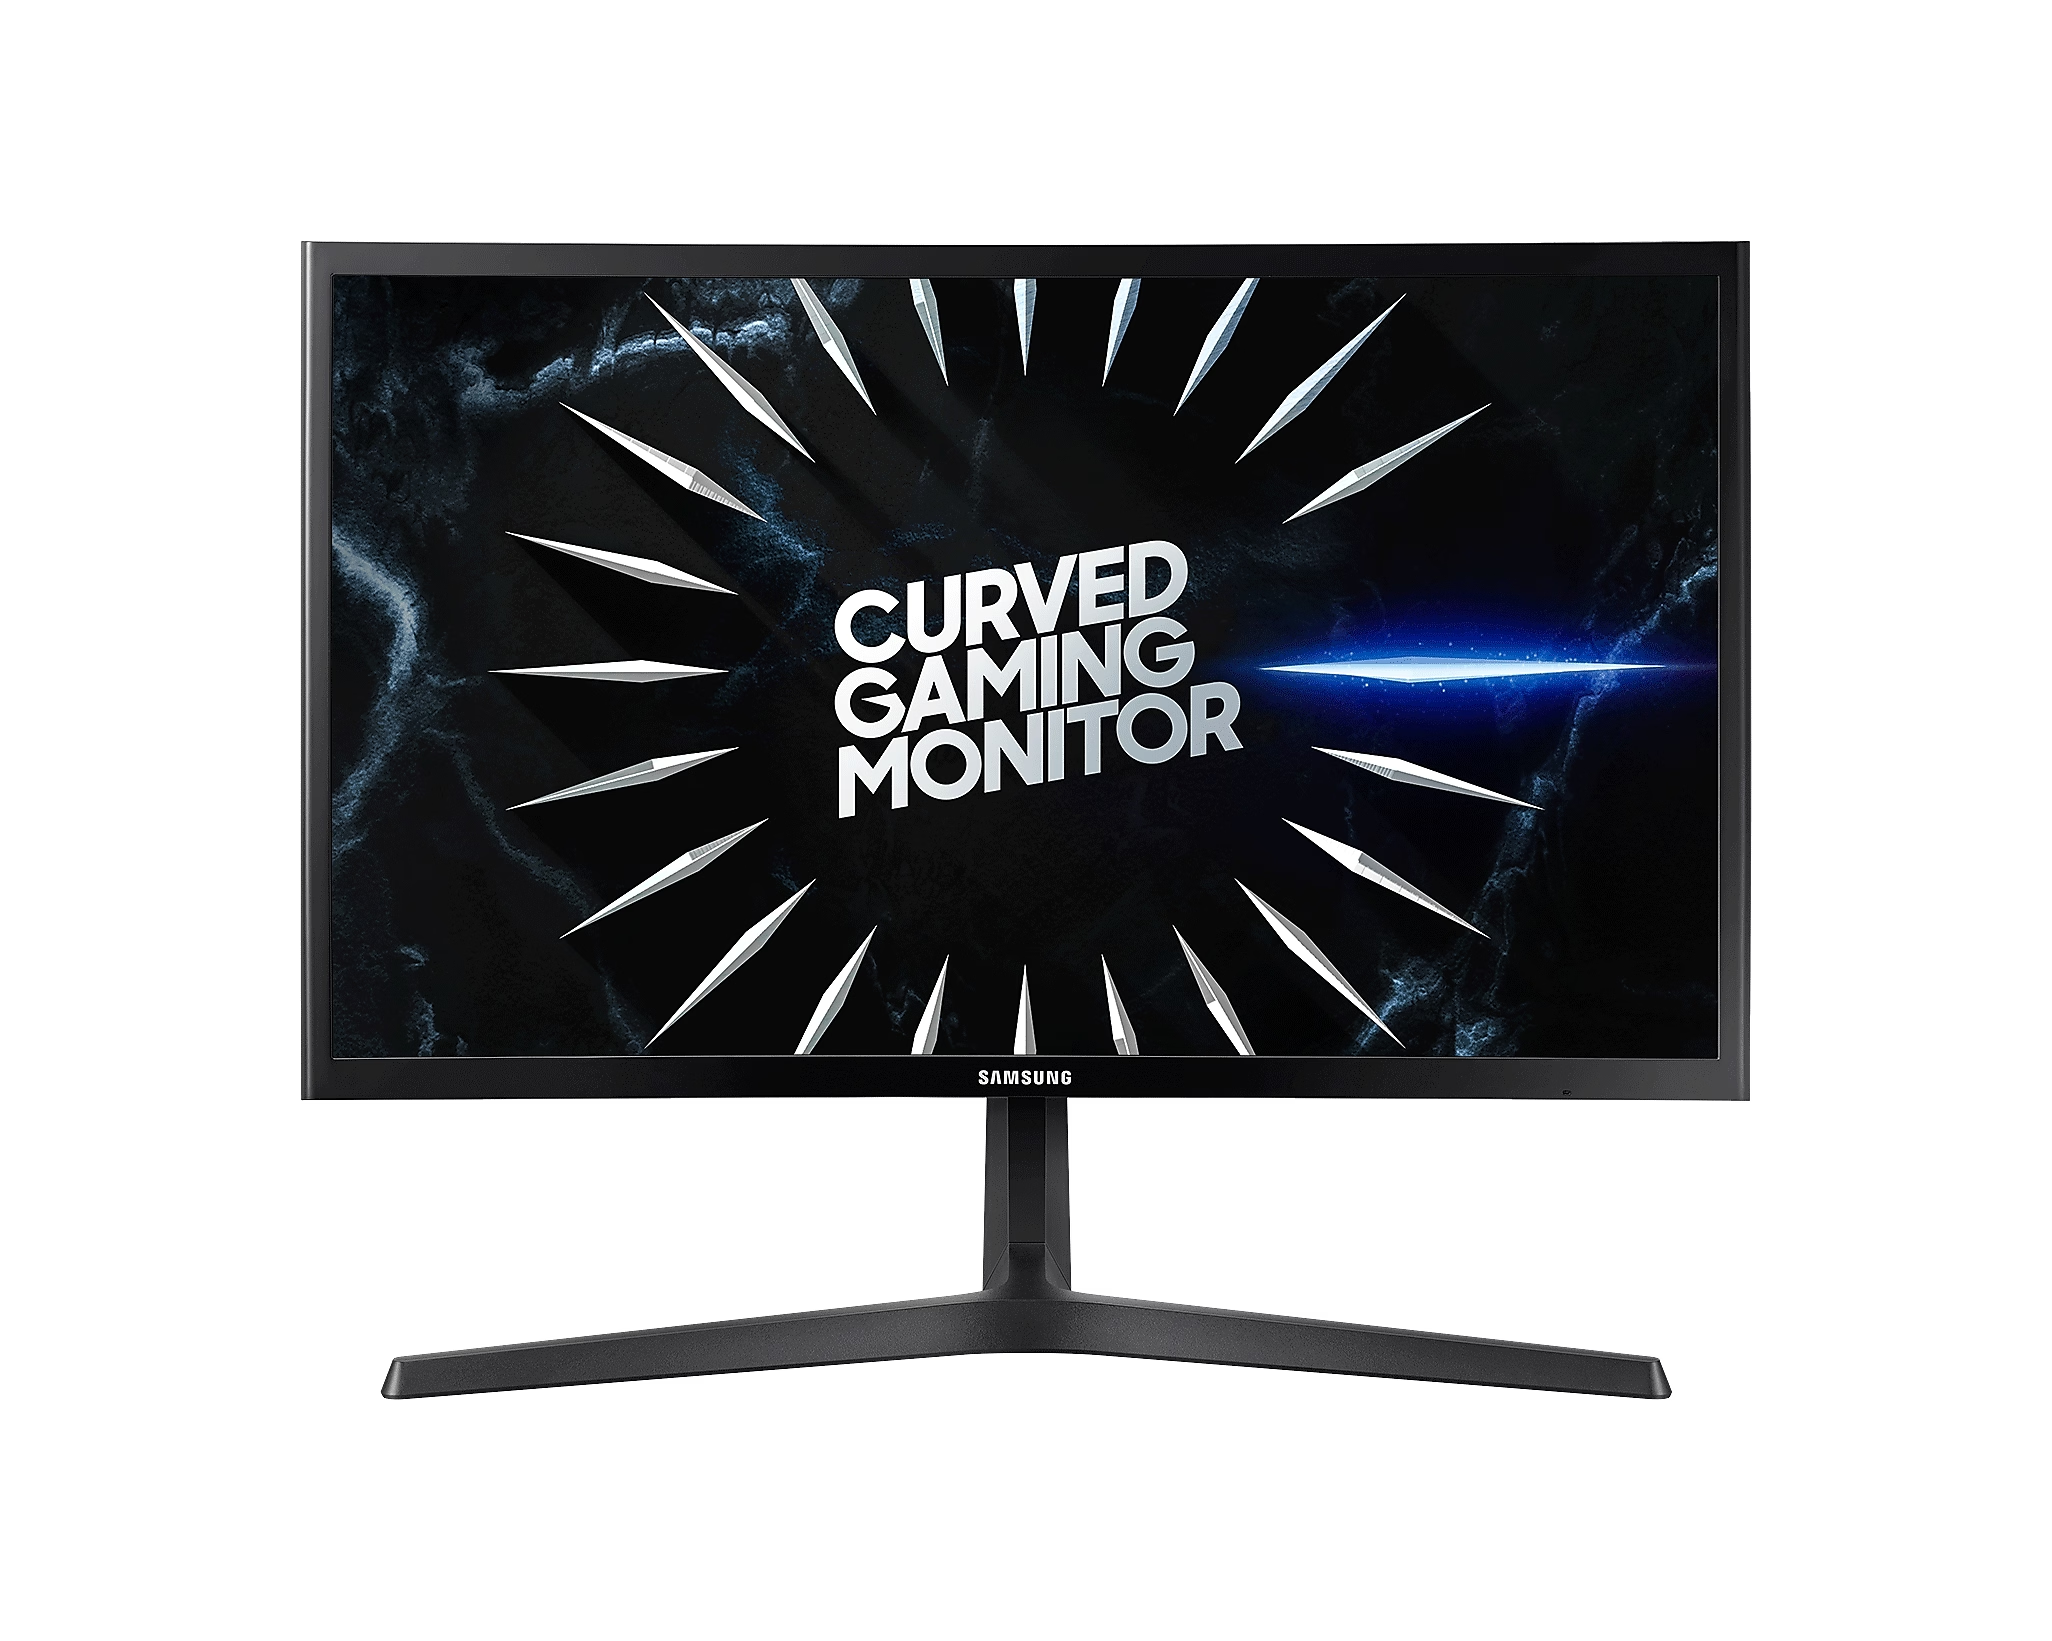 Samsung 24" CRG5 144Hz Curved Gaming Monitor